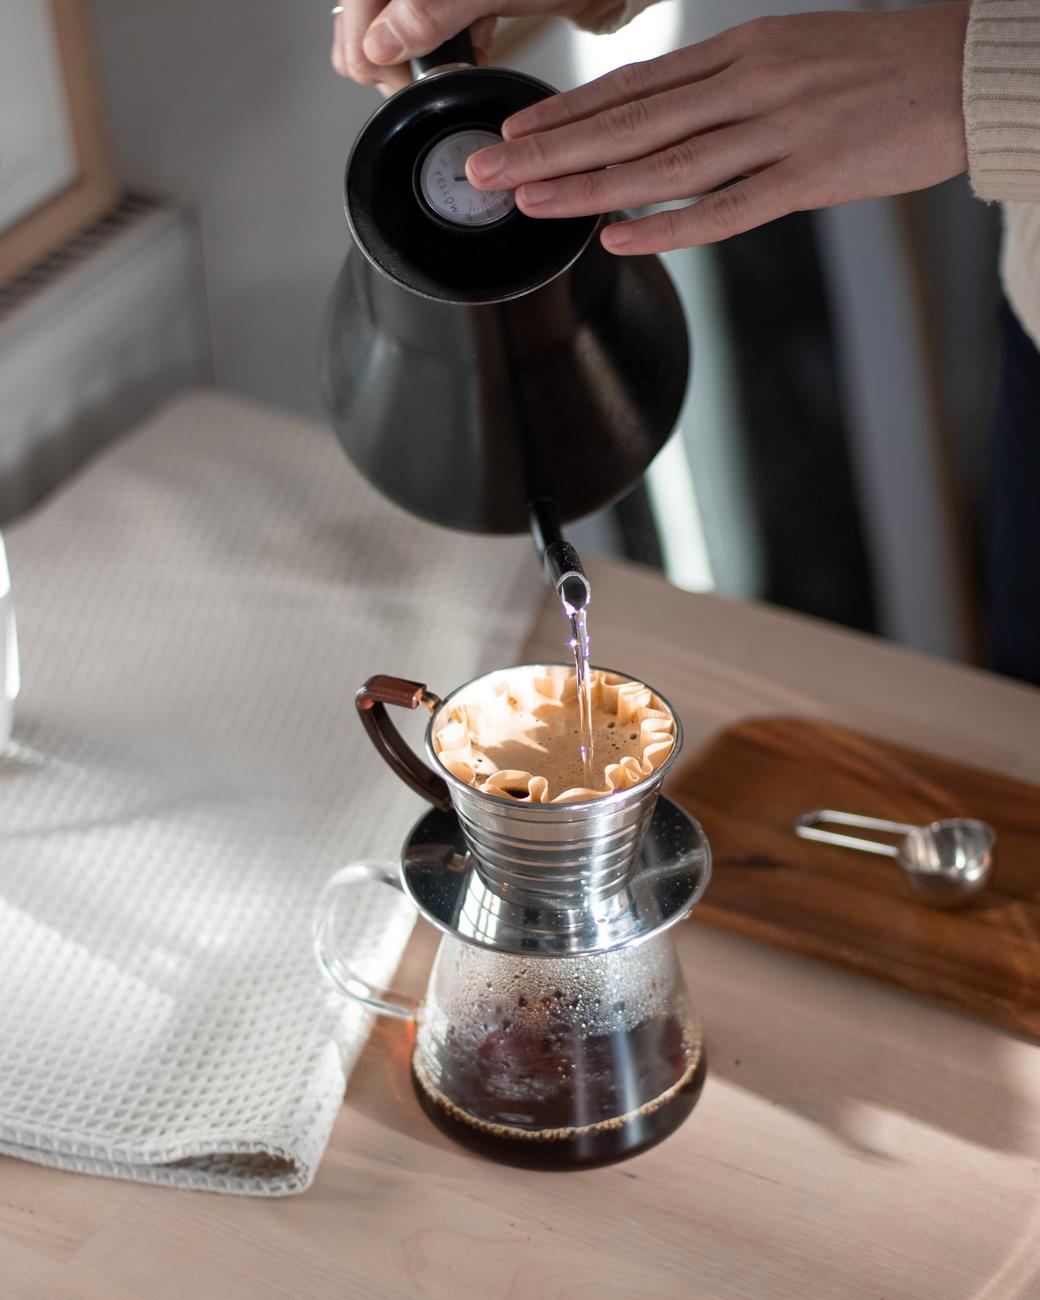 An image of a Kalita Wave being brewed